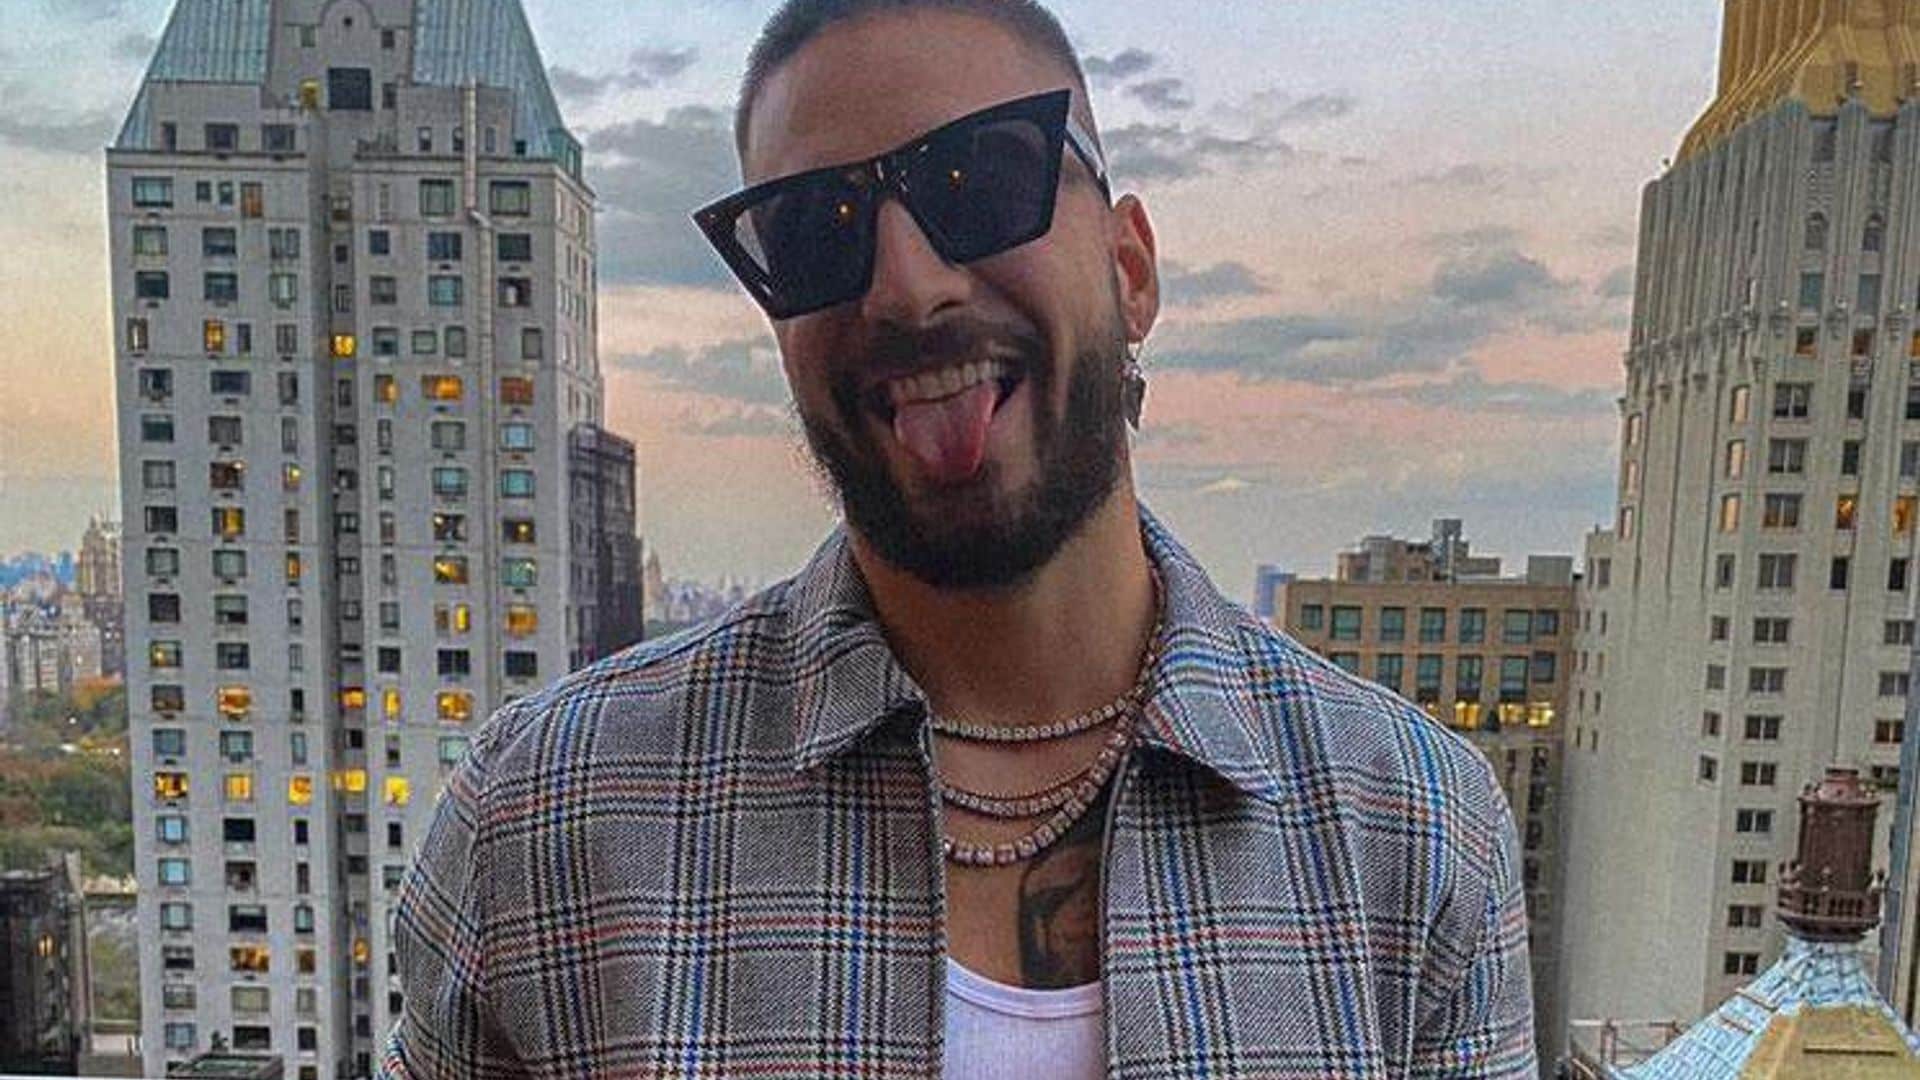 Maluma shares a cheeky message he received following the news of his breakup